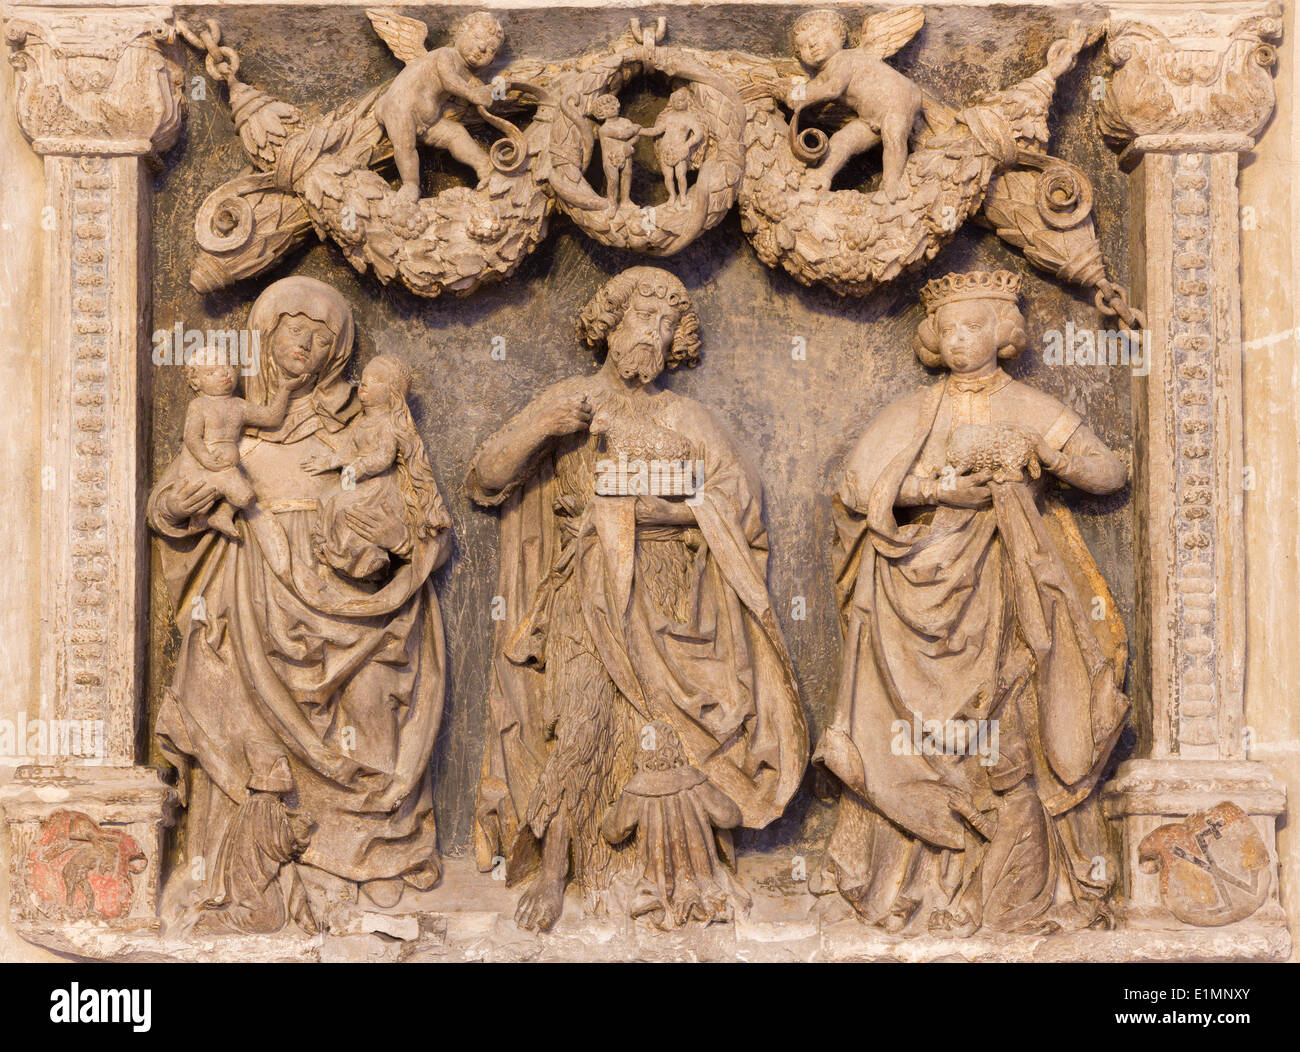 Vienna - Stone relief from back side of Church of the Teutonic Order or Deutschordenkirche - saints Stock Photo